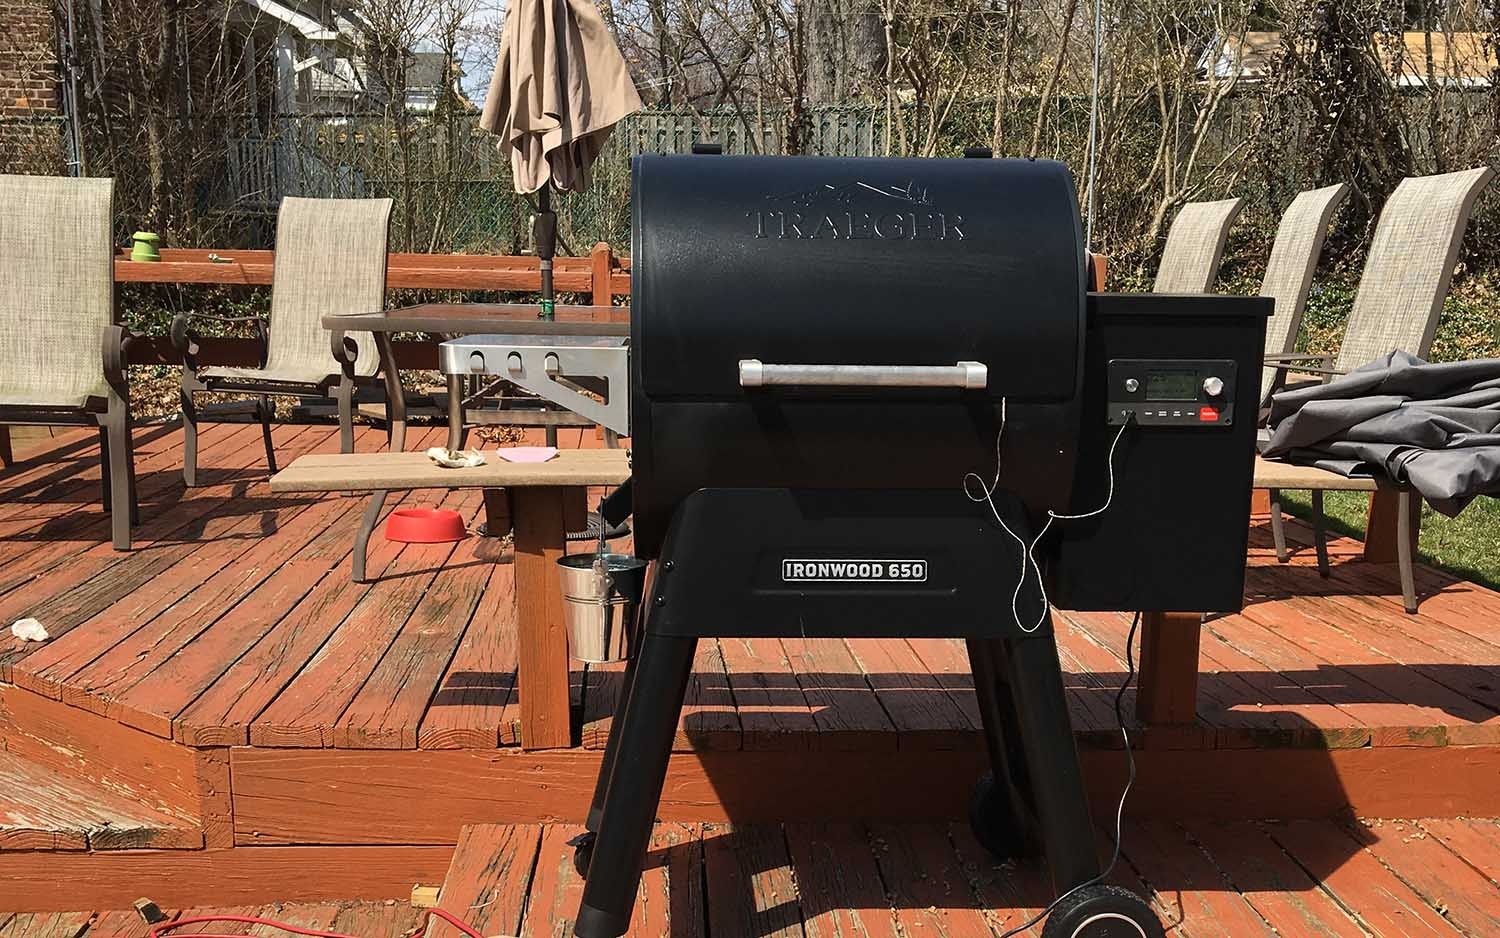 Traeger s Ironwood 650 Smart Grill Will Turn You Into a Pitmaster